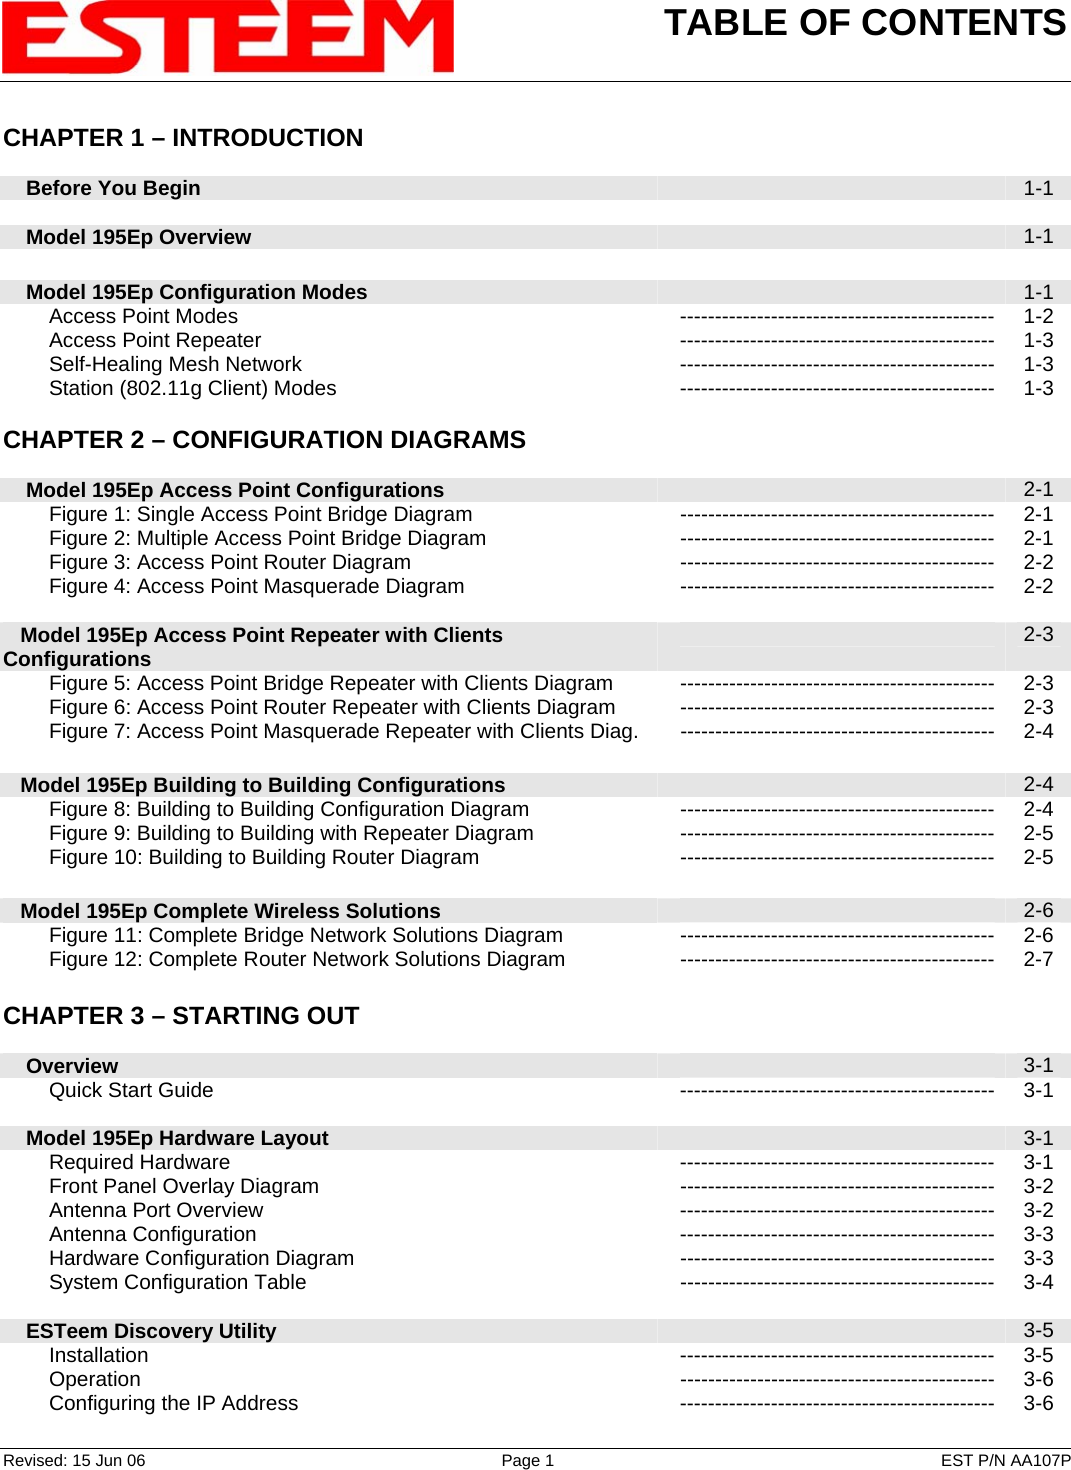 TABLE OF CONTENTS    Revised: 15 Jun 06  Page 1  EST P/N AA107P CHAPTER 1 – INTRODUCTION      Before You Begin   1-1      Model 195Ep Overview   1-1        Model 195Ep Configuration Modes   1-1         Access Point Modes --------------------------------------------- 1-2         Access Point Repeater --------------------------------------------- 1-3         Self-Healing Mesh Network --------------------------------------------- 1-3         Station (802.11g Client) Modes --------------------------------------------- 1-3    CHAPTER 2 – CONFIGURATION DIAGRAMS          Model 195Ep Access Point Configurations   2-1         Figure 1: Single Access Point Bridge Diagram  --------------------------------------------- 2-1         Figure 2: Multiple Access Point Bridge Diagram  --------------------------------------------- 2-1         Figure 3: Access Point Router Diagram --------------------------------------------- 2-2         Figure 4: Access Point Masquerade Diagram --------------------------------------------- 2-2       Model 195Ep Access Point Repeater with Clients Configurations   2-3         Figure 5: Access Point Bridge Repeater with Clients Diagram  --------------------------------------------- 2-3         Figure 6: Access Point Router Repeater with Clients Diagram  --------------------------------------------- 2-3         Figure 7: Access Point Masquerade Repeater with Clients Diag.  --------------------------------------------- 2-4       Model 195Ep Building to Building Configurations   2-4         Figure 8: Building to Building Configuration Diagram  --------------------------------------------- 2-4         Figure 9: Building to Building with Repeater Diagram  --------------------------------------------- 2-5         Figure 10: Building to Building Router Diagram  --------------------------------------------- 2-5       Model 195Ep Complete Wireless Solutions   2-6         Figure 11: Complete Bridge Network Solutions Diagram  --------------------------------------------- 2-6         Figure 12: Complete Router Network Solutions Diagram  --------------------------------------------- 2-7    CHAPTER 3 – STARTING OUT          Overview   3-1         Quick Start Guide --------------------------------------------- 3-1        Model 195Ep Hardware Layout   3-1         Required Hardware  --------------------------------------------- 3-1         Front Panel Overlay Diagram --------------------------------------------- 3-2         Antenna Port Overview --------------------------------------------- 3-2         Antenna Configuration --------------------------------------------- 3-3         Hardware Configuration Diagram --------------------------------------------- 3-3         System Configuration Table --------------------------------------------- 3-4        ESTeem Discovery Utility   3-5         Installation --------------------------------------------- 3-5         Operation --------------------------------------------- 3-6         Configuring the IP Address --------------------------------------------- 3-6 